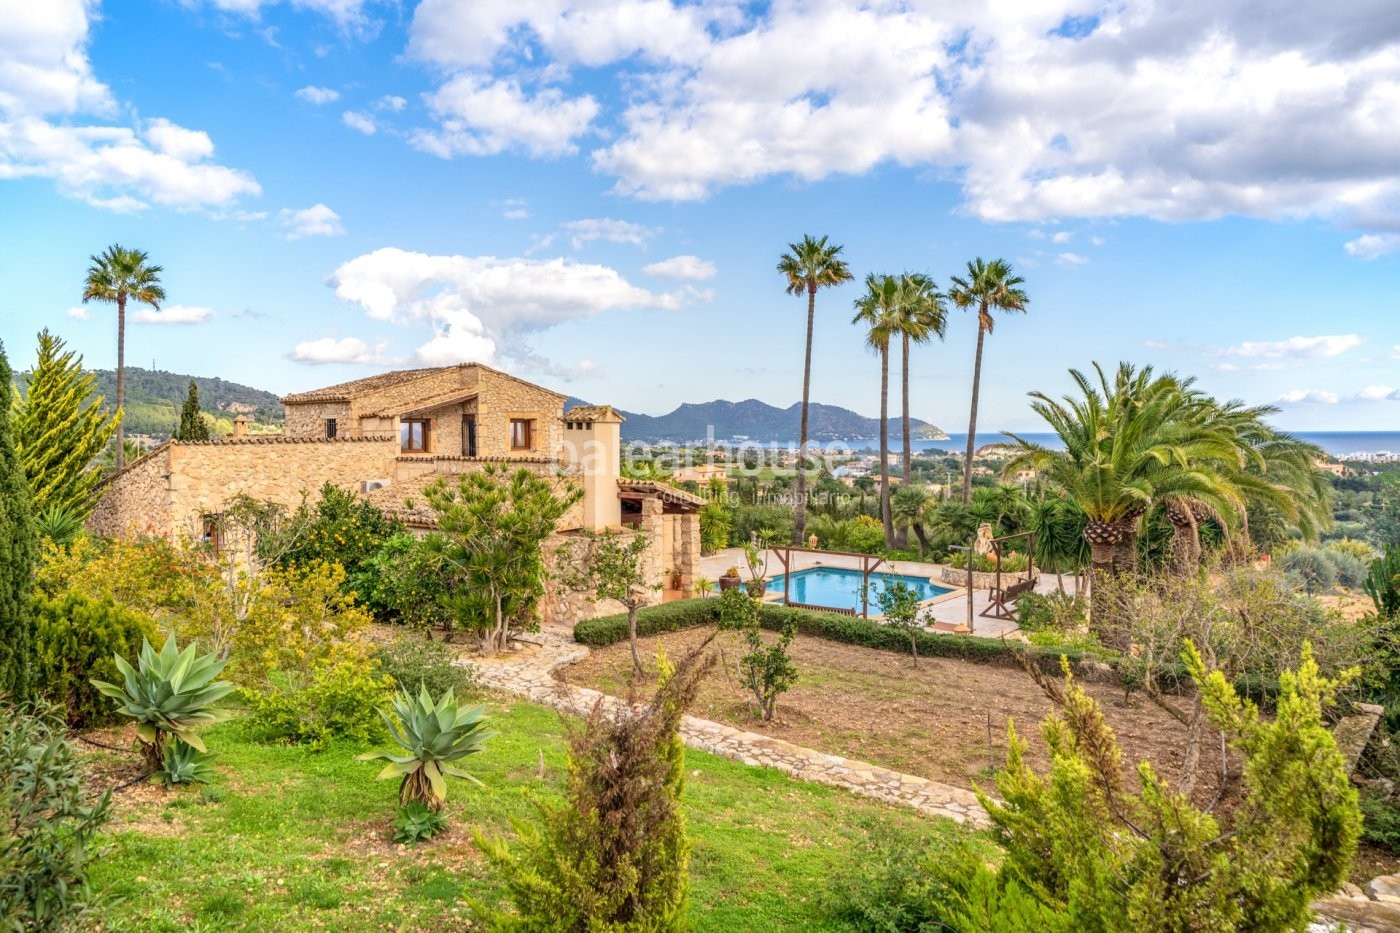 Excellent finca in Son Servera with sea views, terraces, garden, swimming pool and large plot.